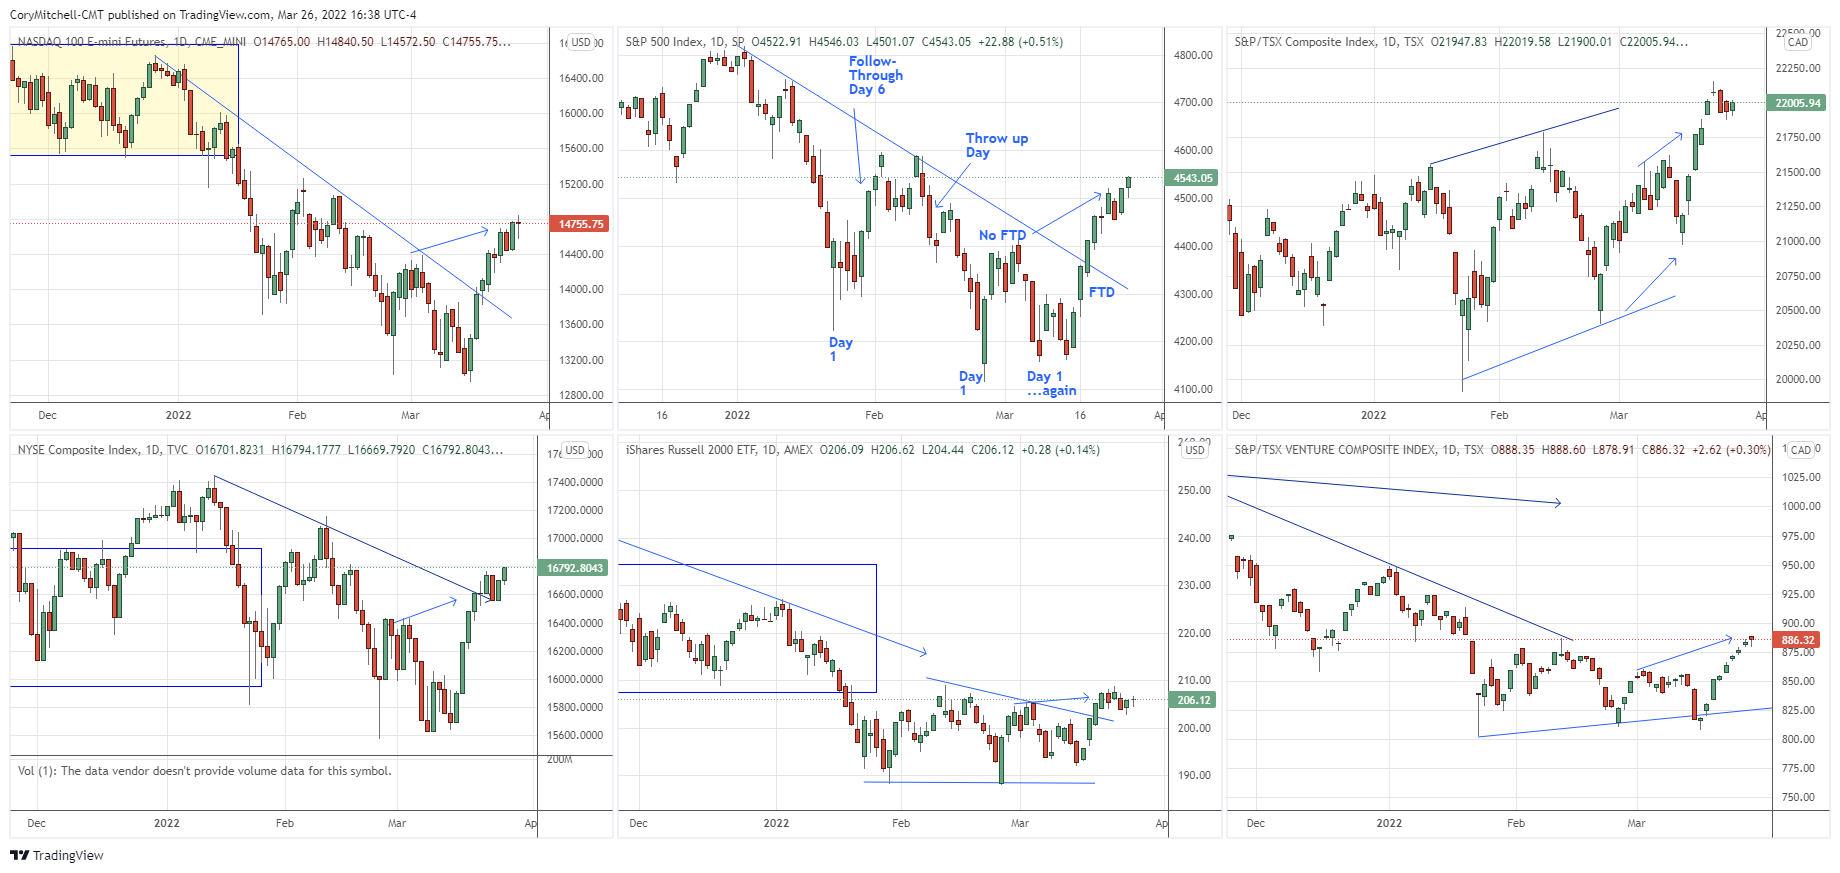 US and Canadian stock index comparison March 26